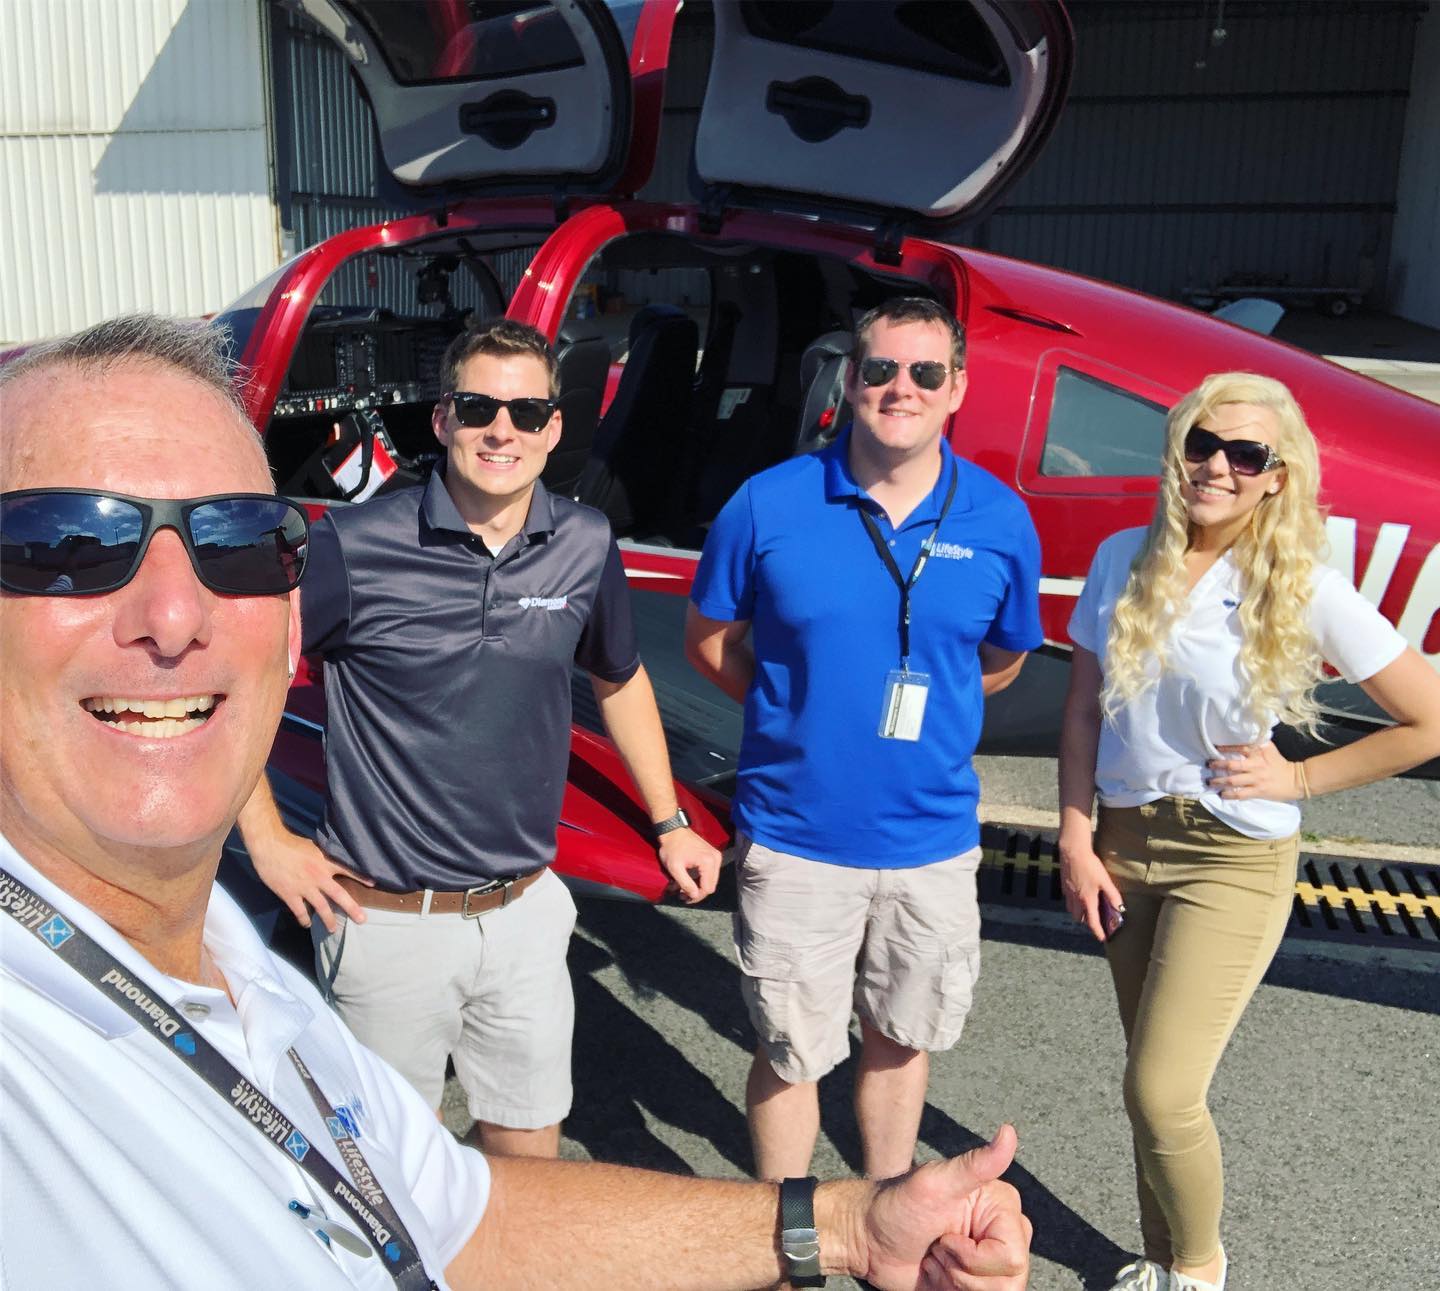 LifeStyle Aviation Team in front of red DA62